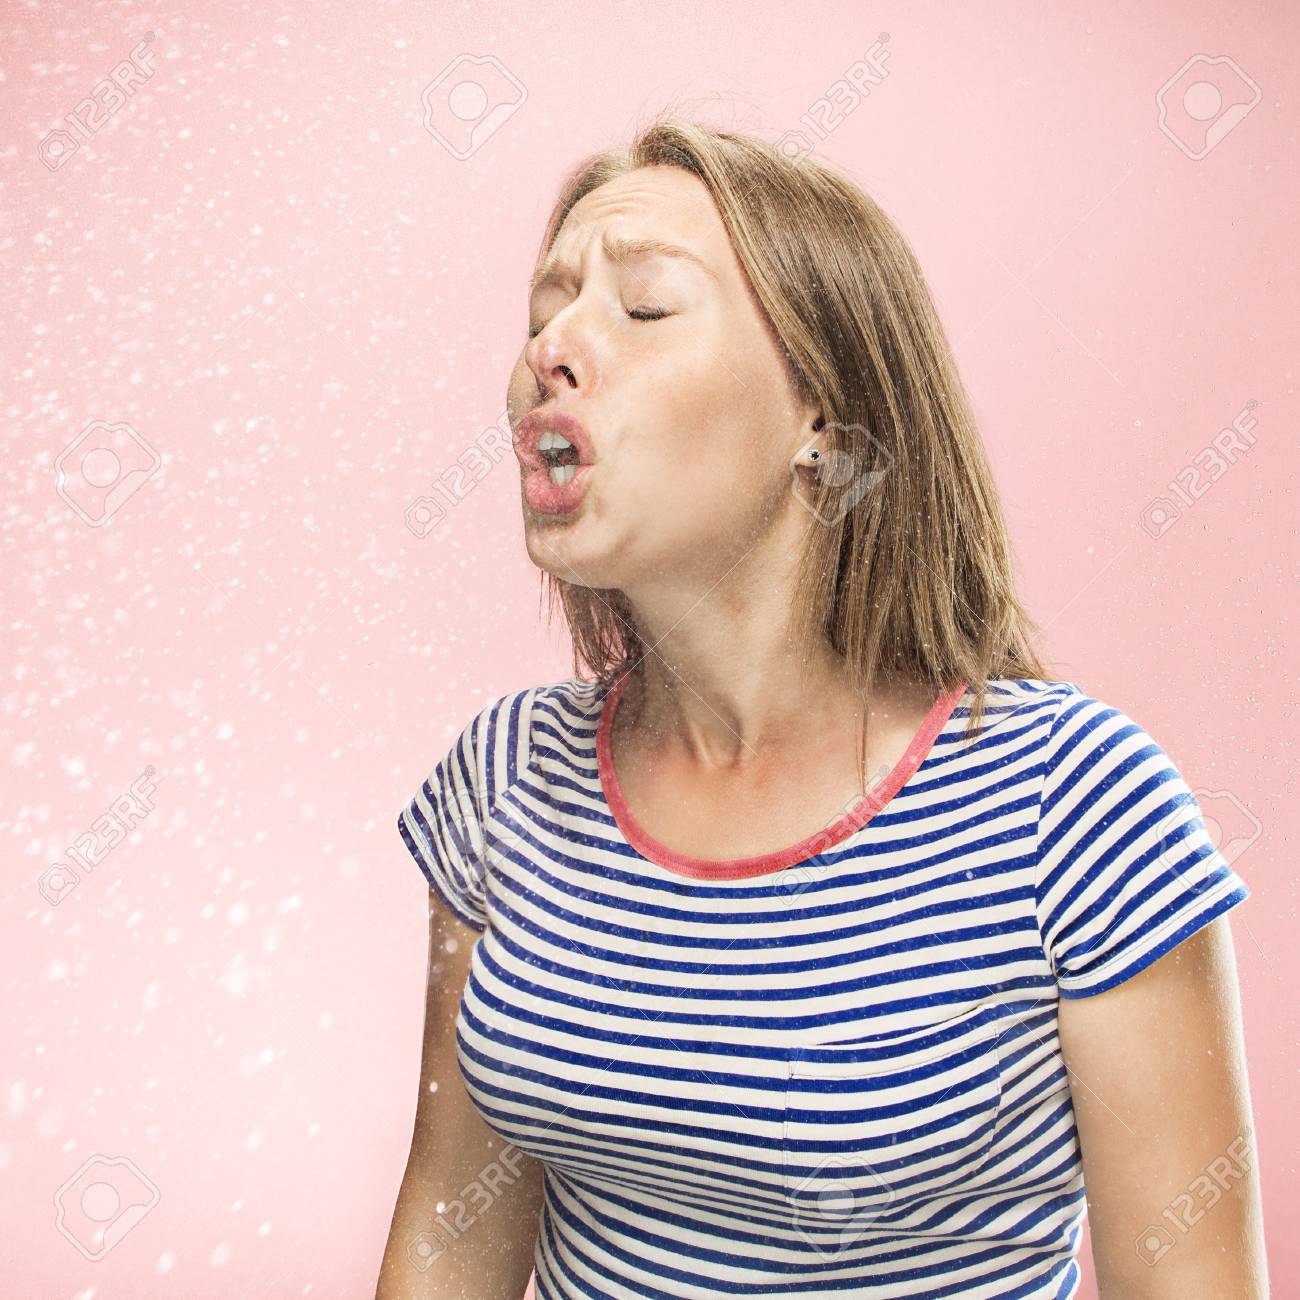 Young Funny Woman Sneezing With Spray And Small Drops Studio